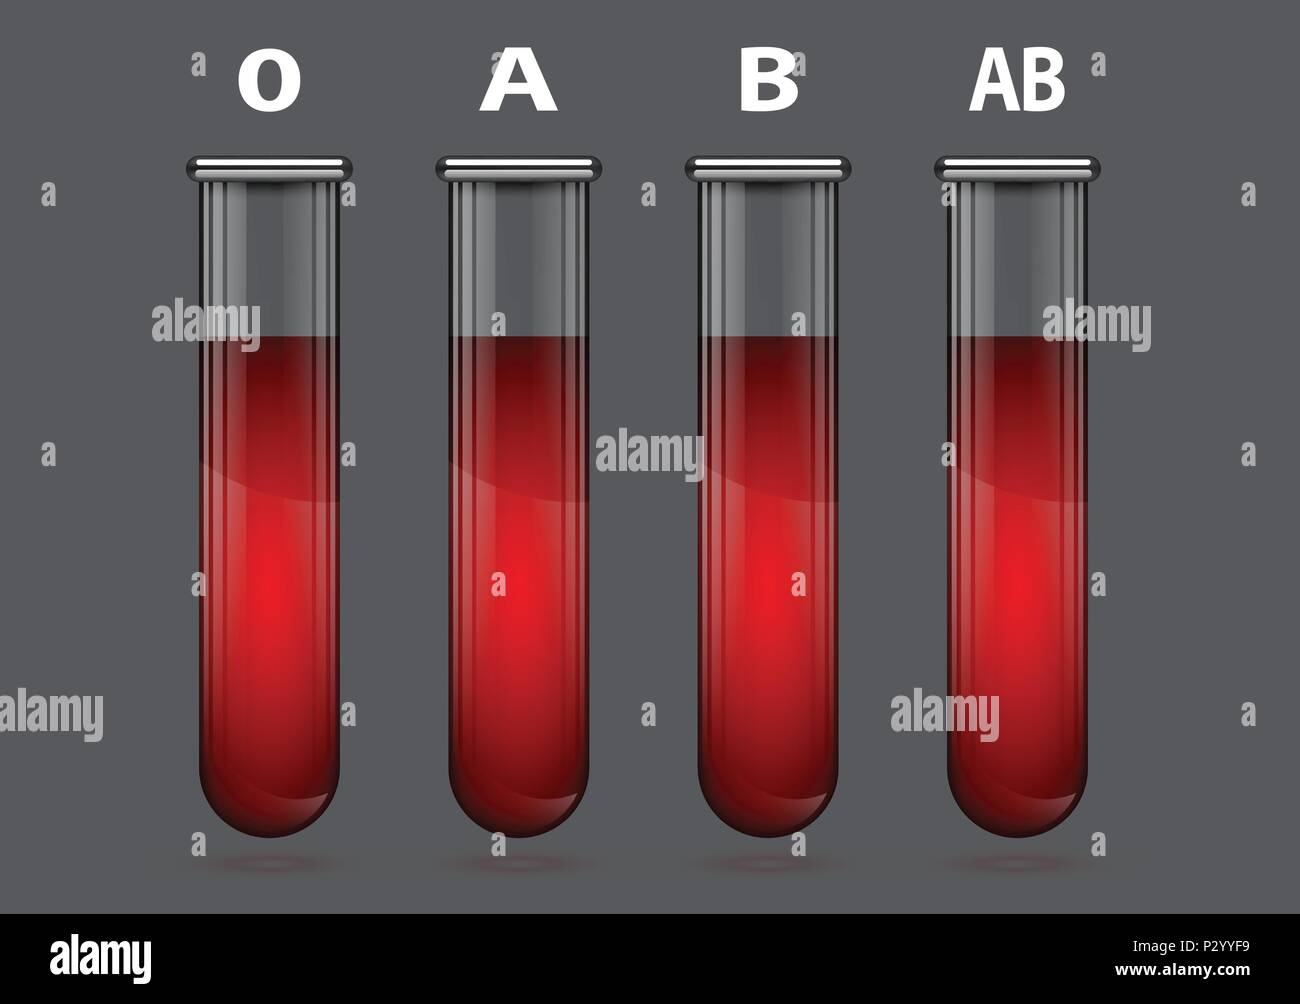 Blood type o positive hi-res stock photography and images - Alamy